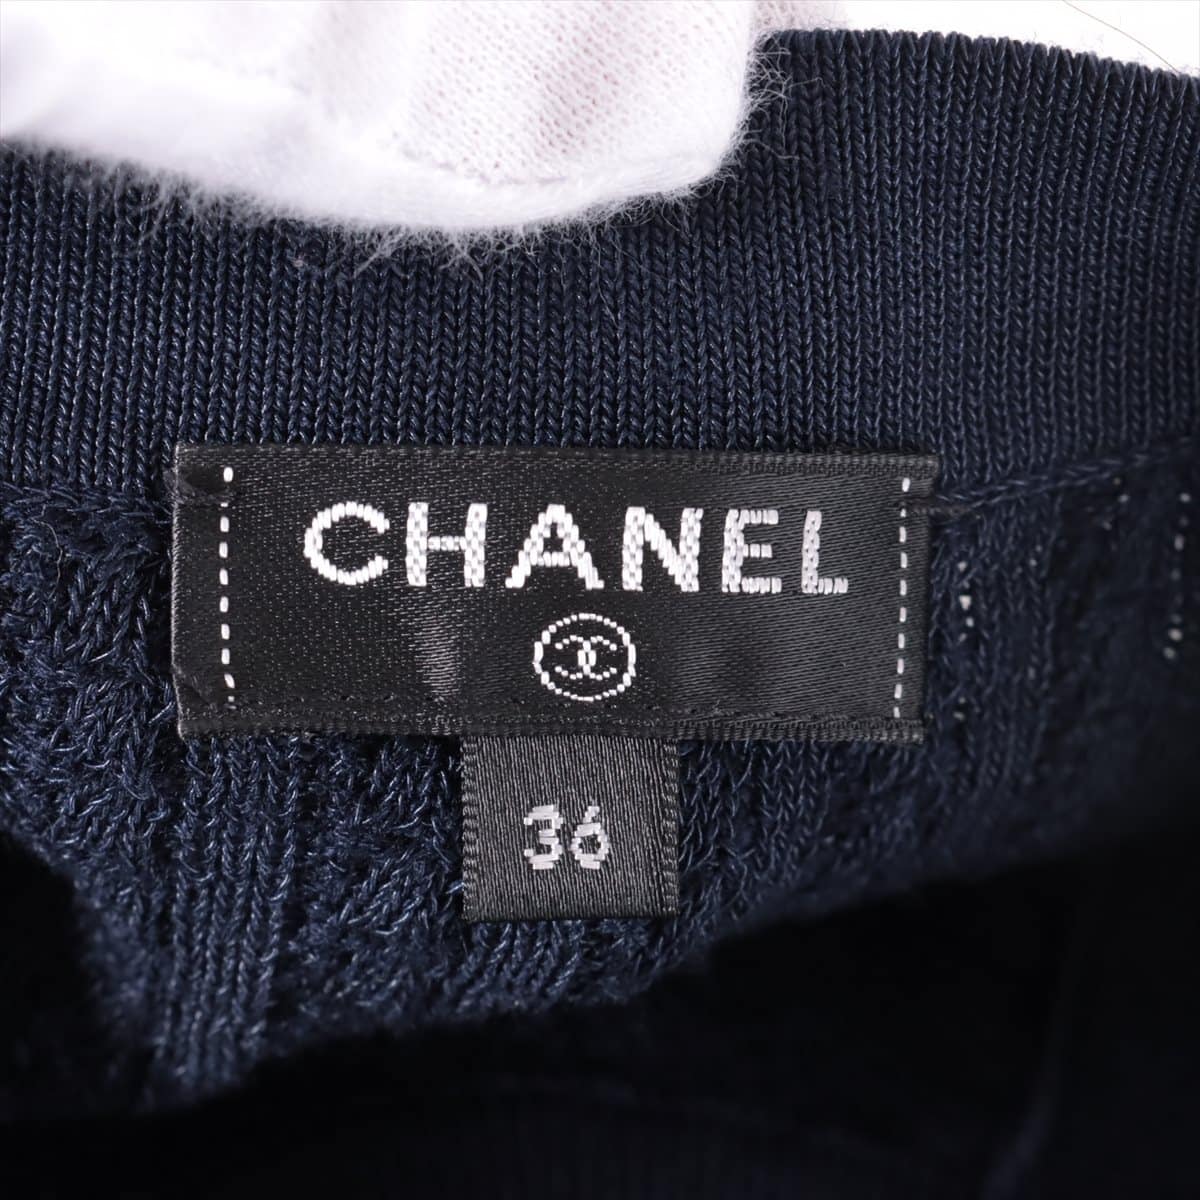 Chanel Anchor P59 Cotton & wool Knit dress 36 Ladies' Navy blue  Coco Mark